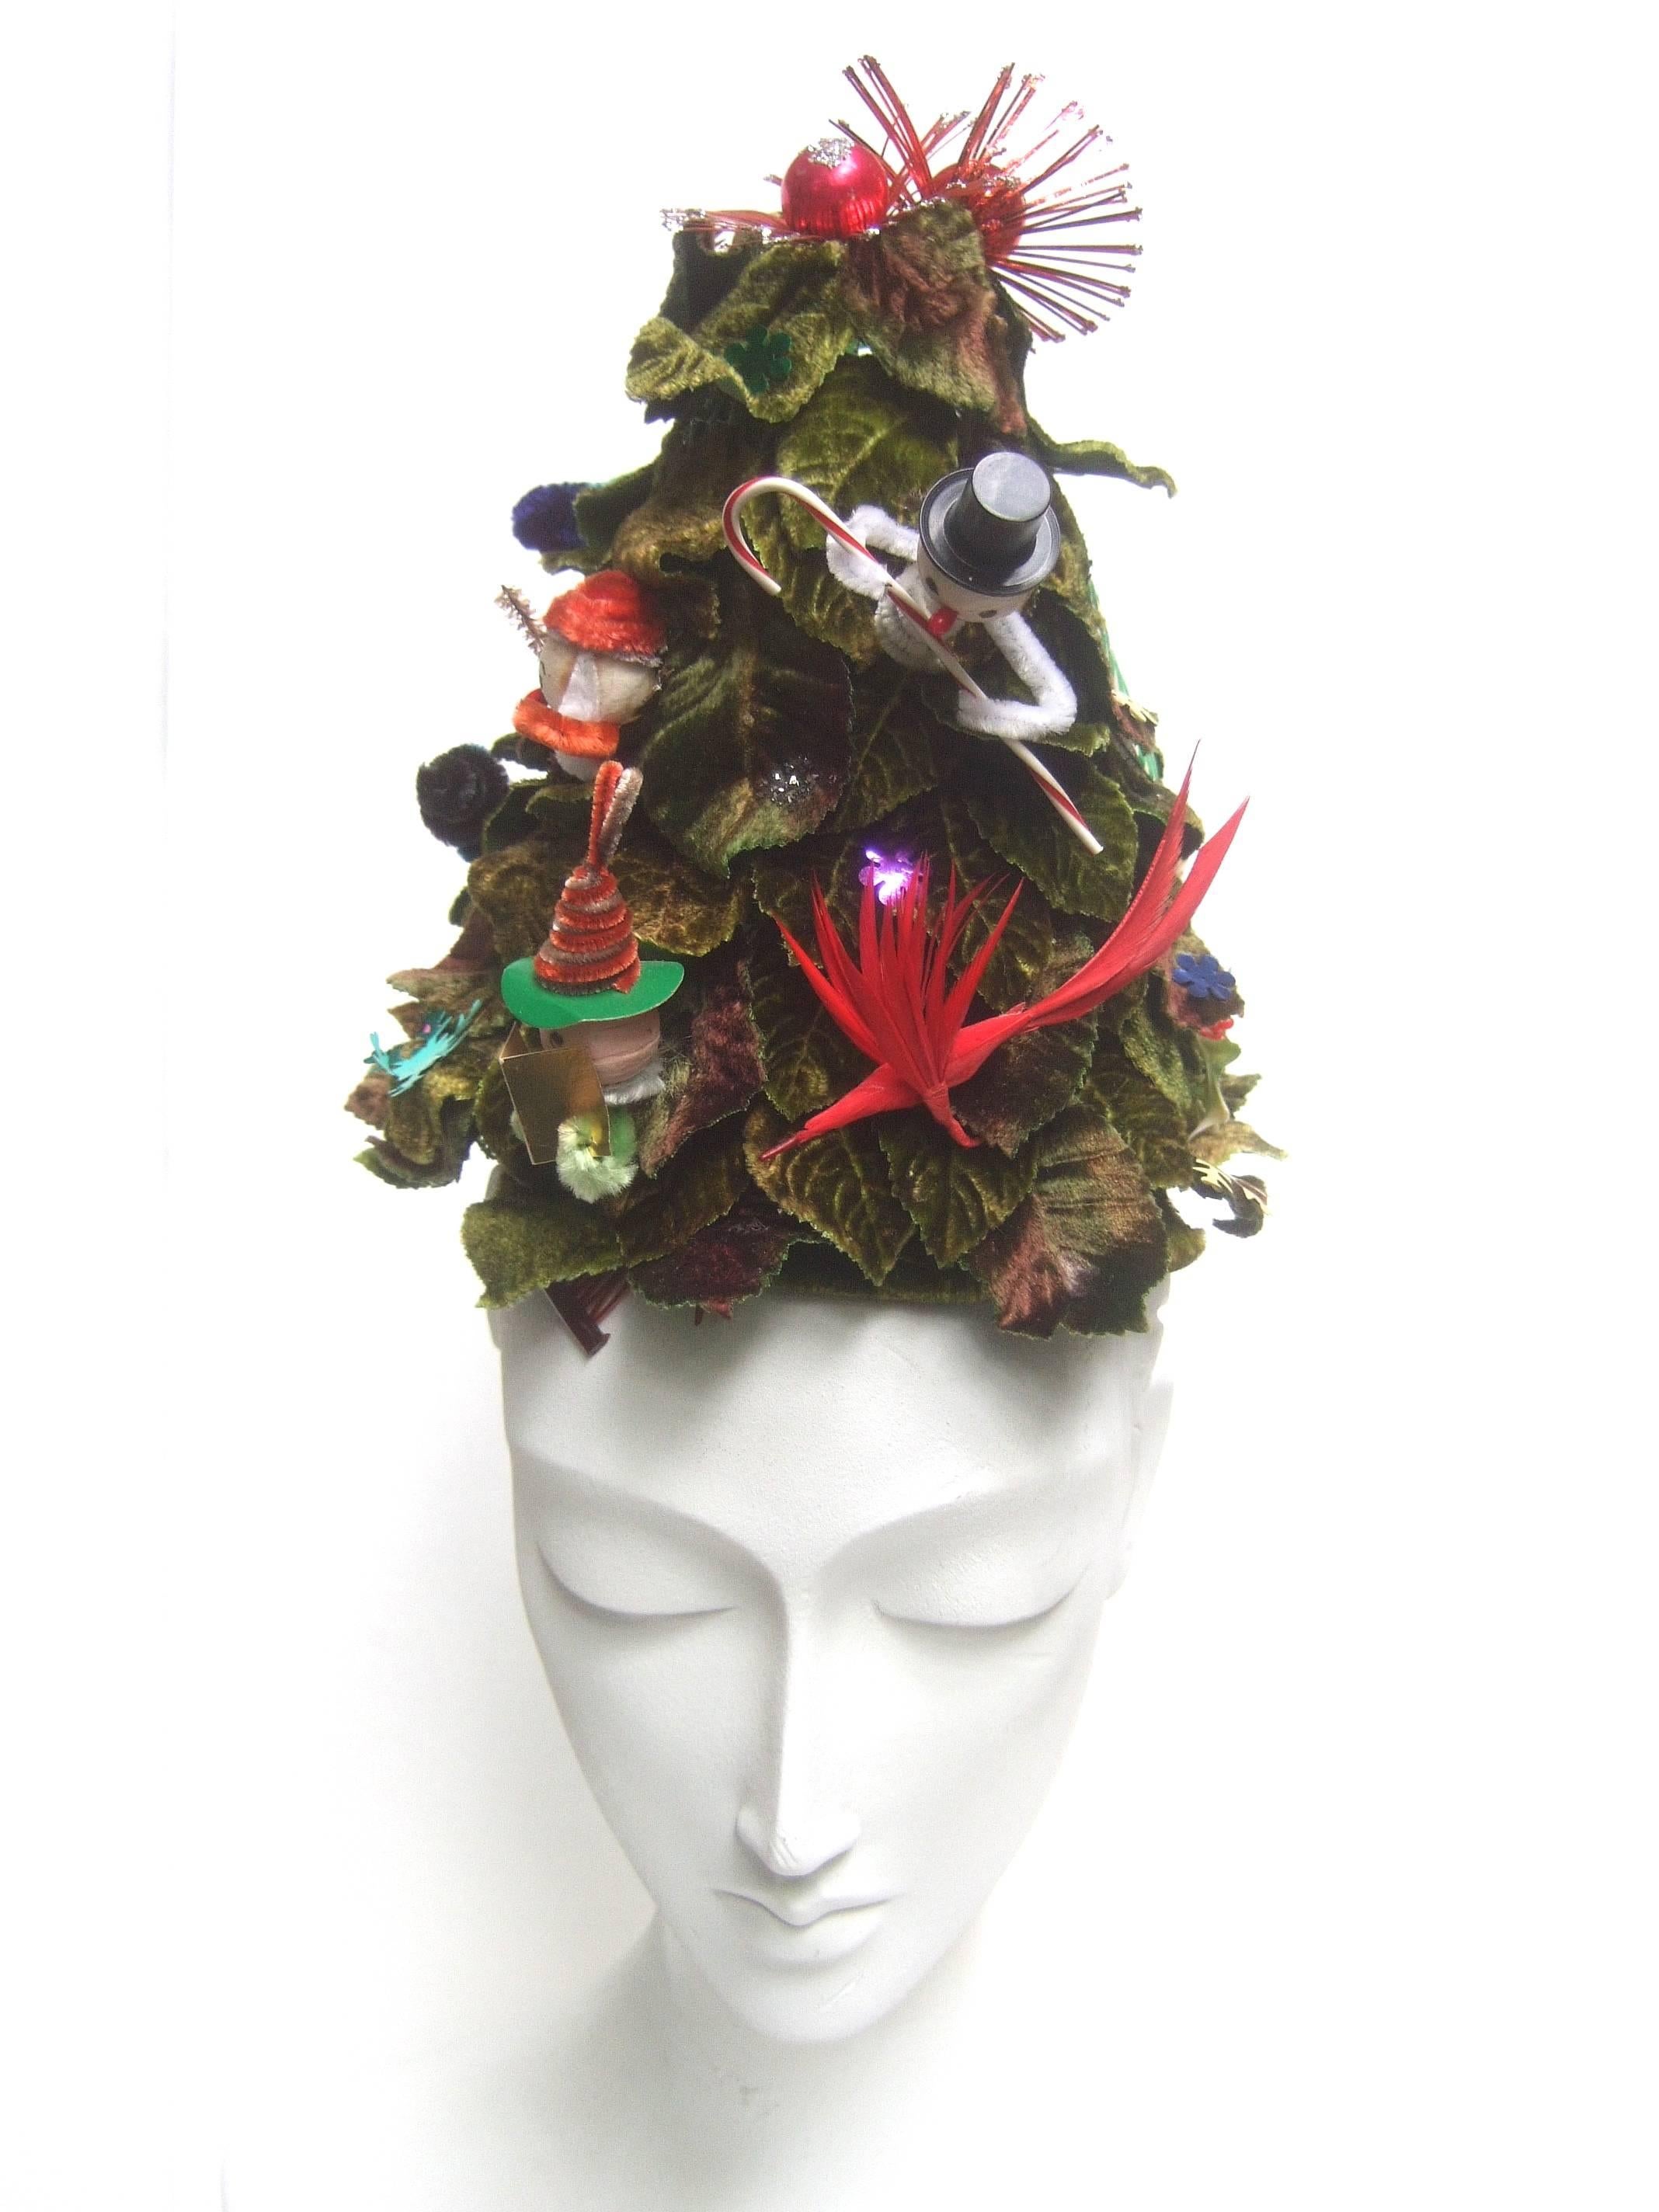 Bes Ben Whimsical winter wonderland Christmas tree hat c 1950
The incredible artisan hat was conceived from the millinery 
genius of Benjamin Green - Field aka the Mad Hatter 

The extraordinary avant-garde conical hat is designed in the